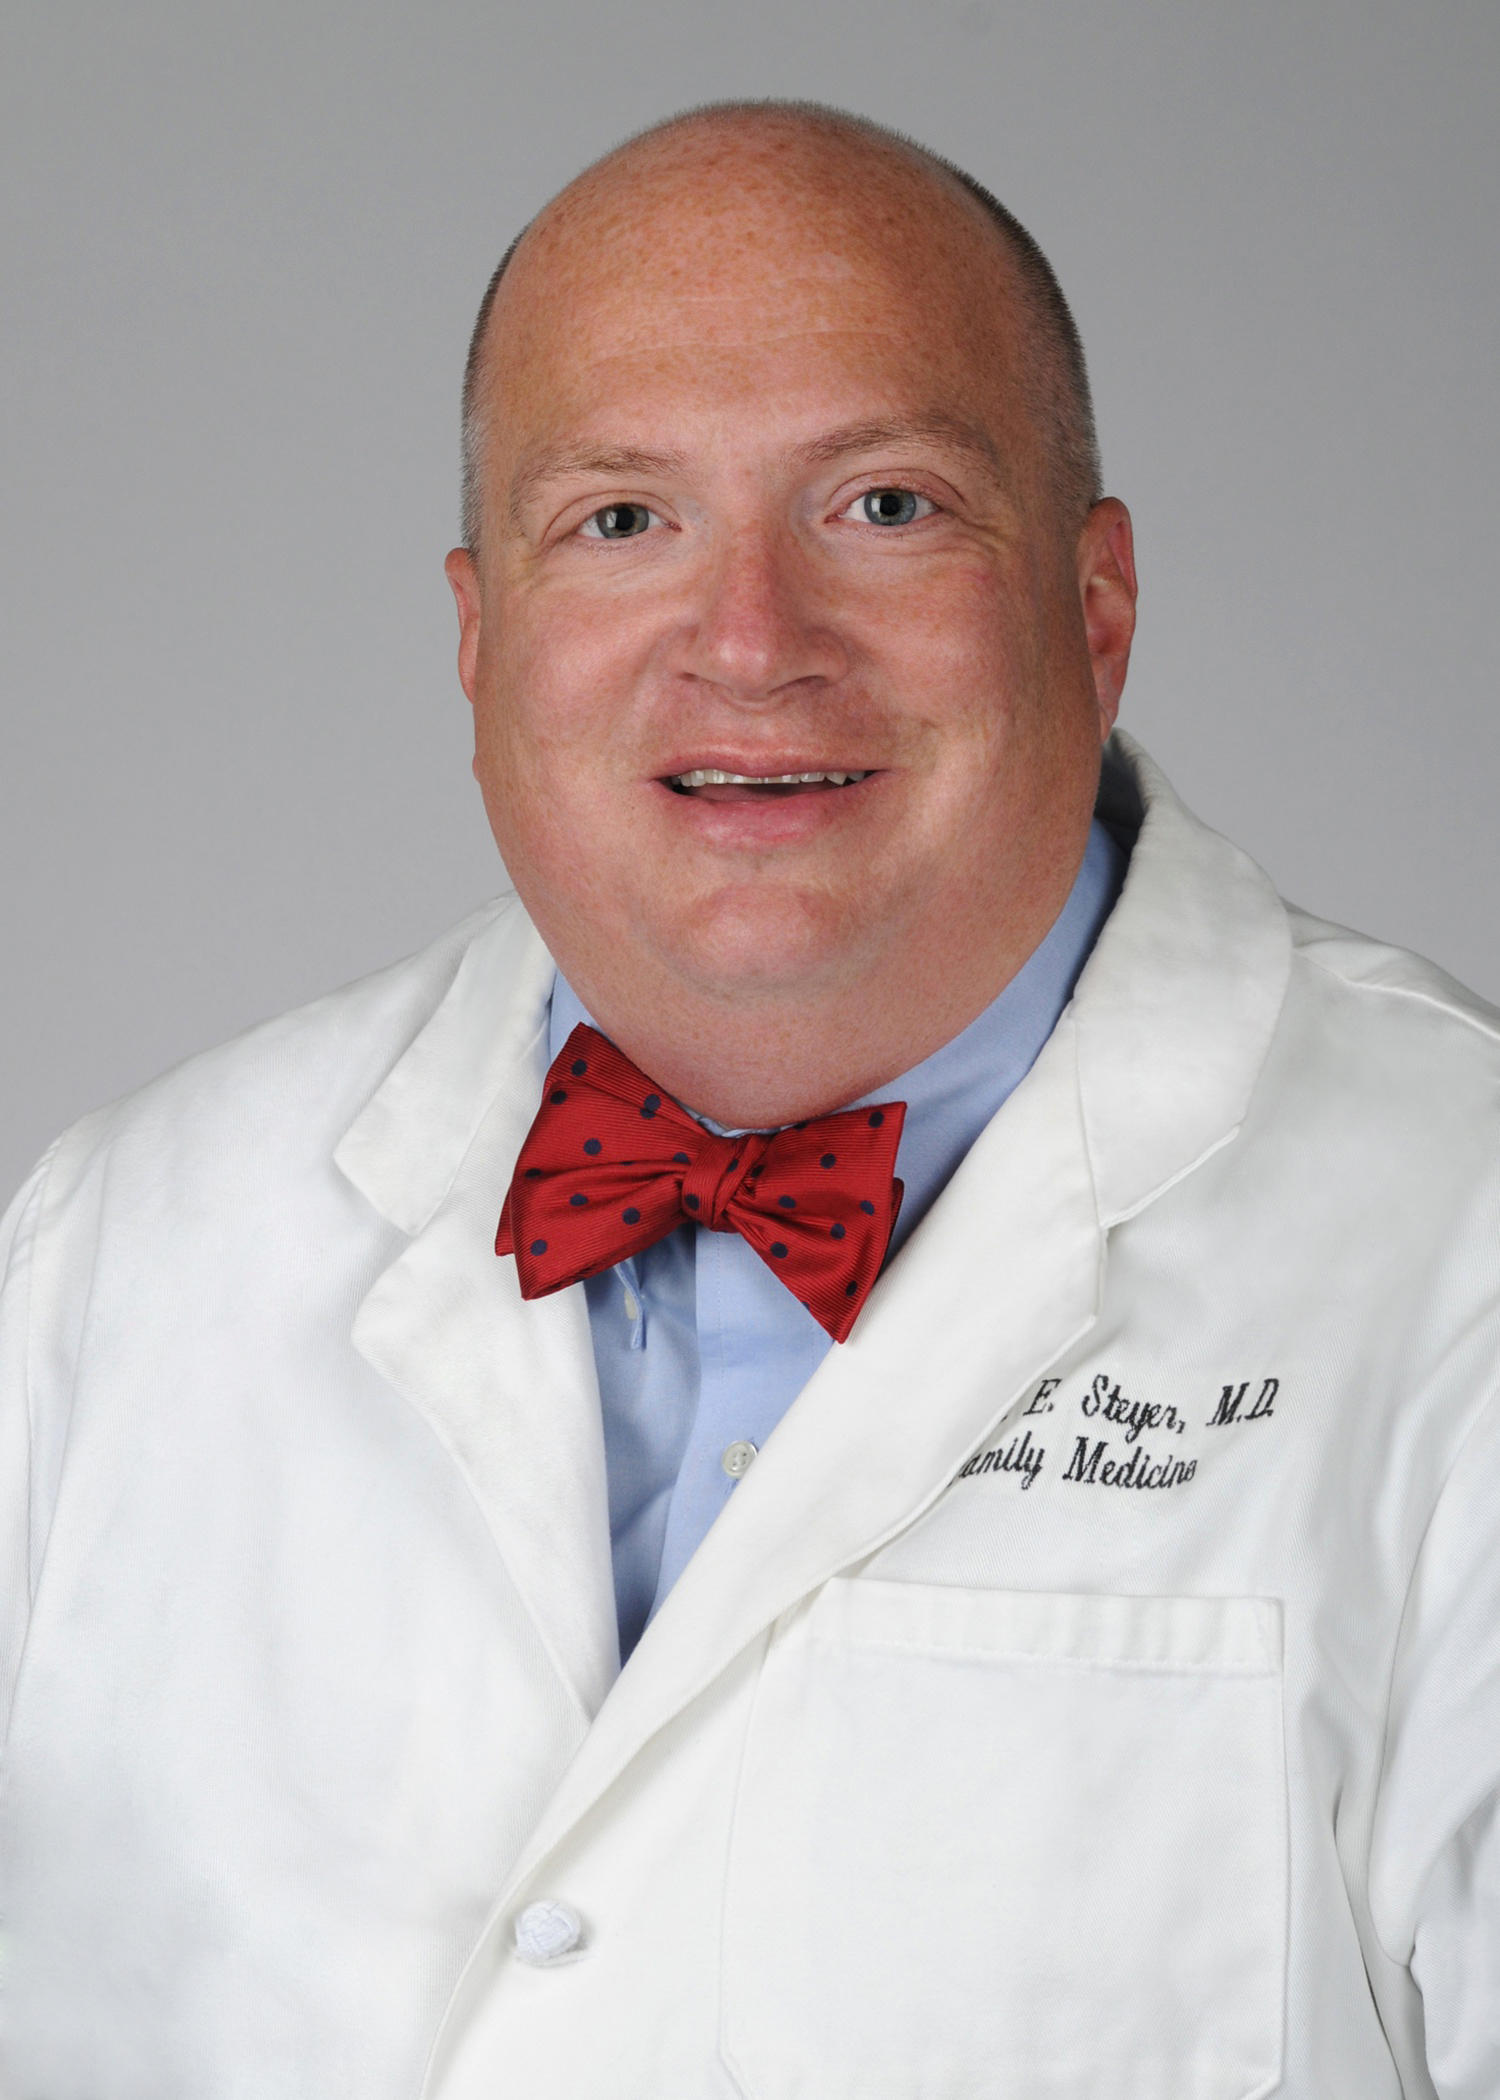 Terrence Earl Steyer MD